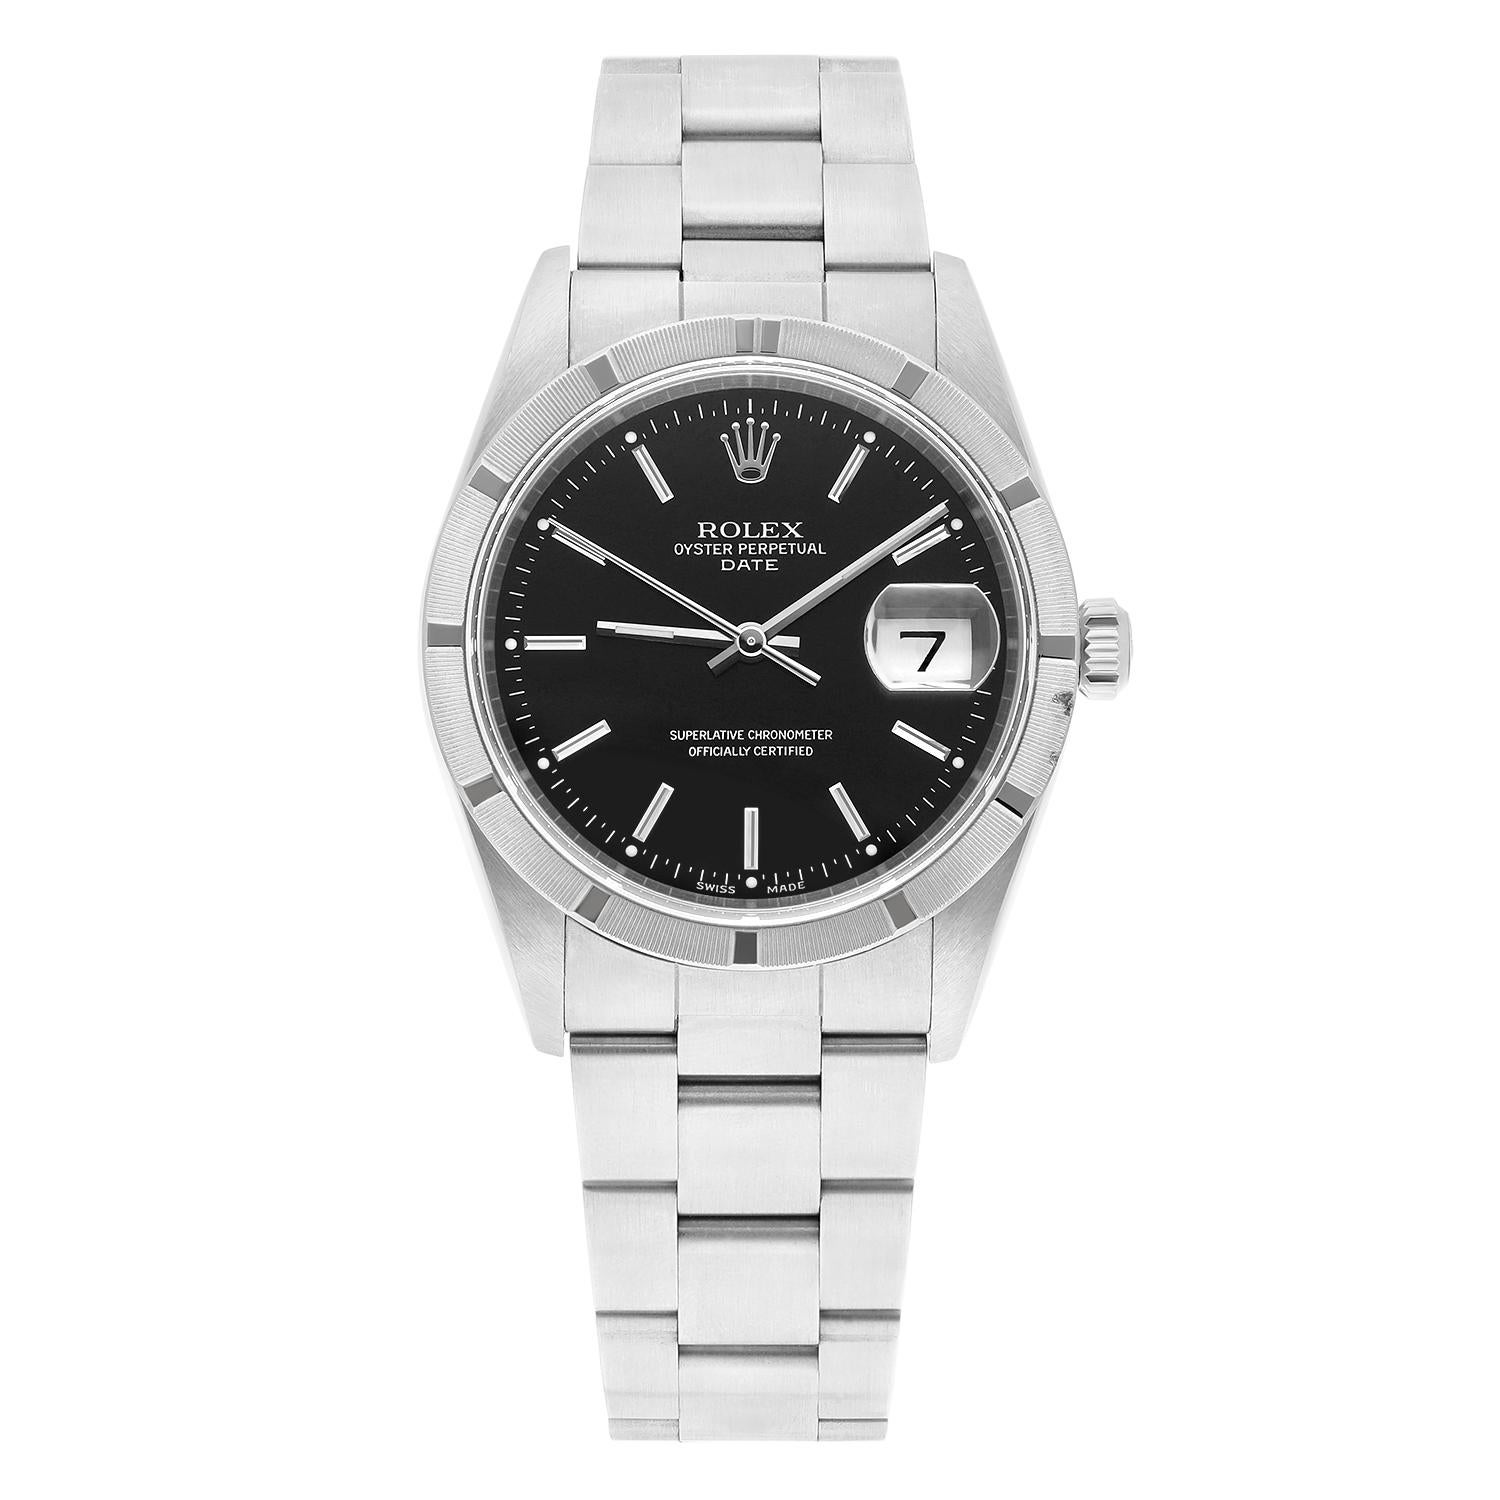 Unisex Rolex Date Stainless Steel Watch Oyster Black Dial 15210 Circa 1999 
This watch has been professionally polished, serviced and is in excellent overall condition. There are absolutely no visible scratches or blemishes. Bezel has a small dent